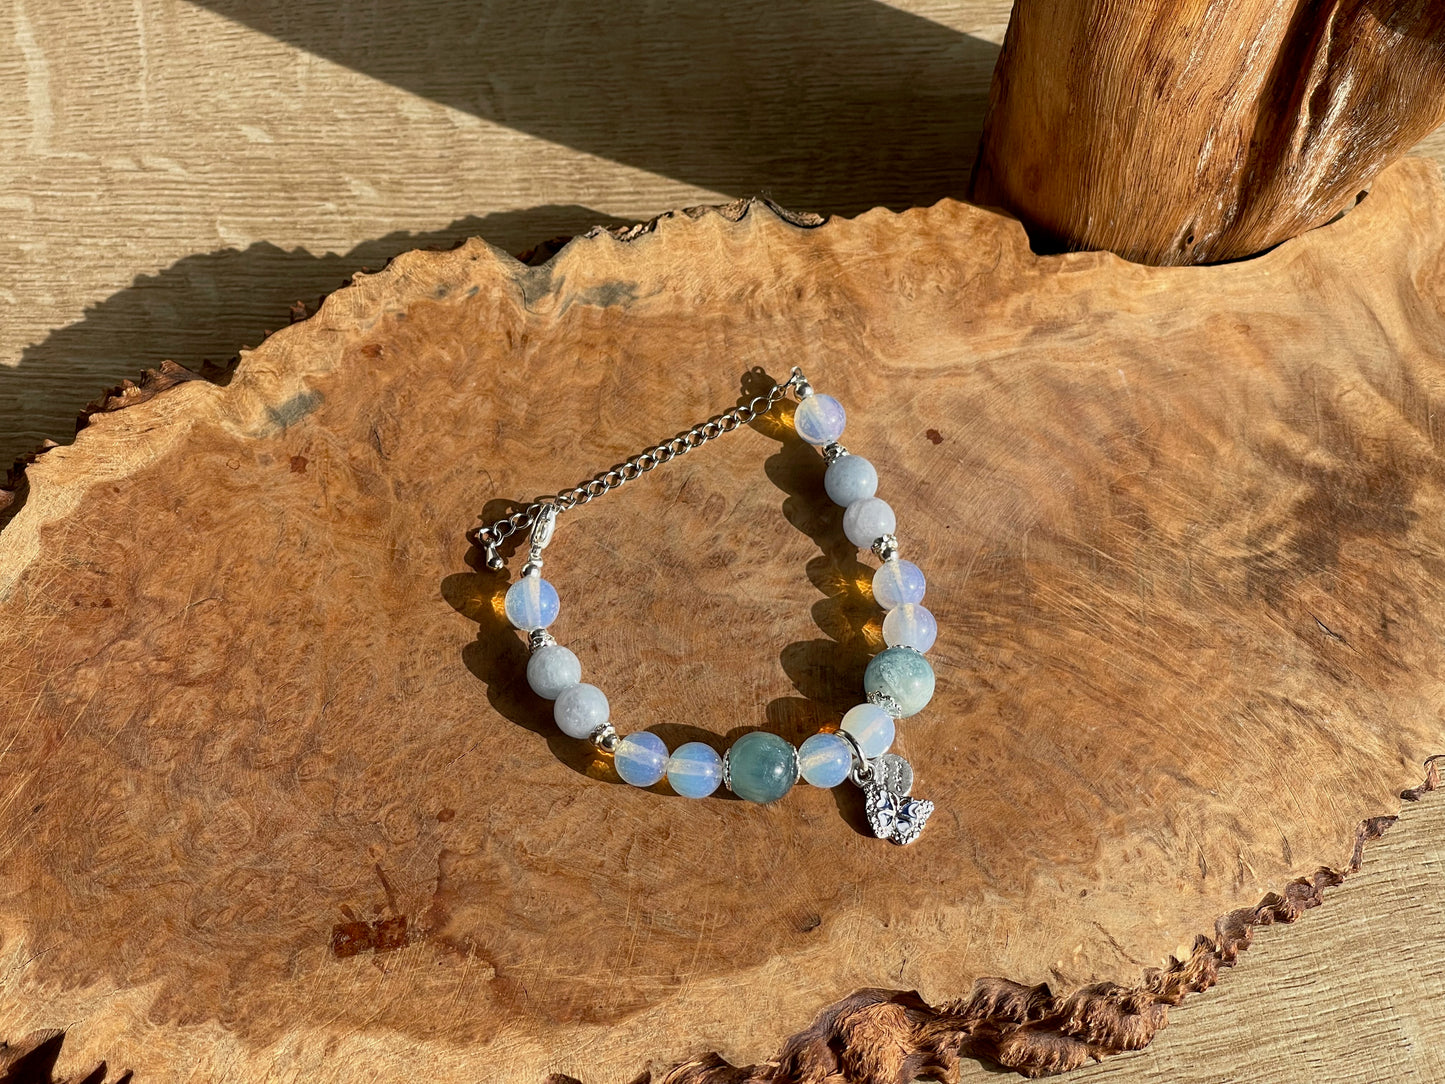 Aquamarine and opalite butterfly bracelet